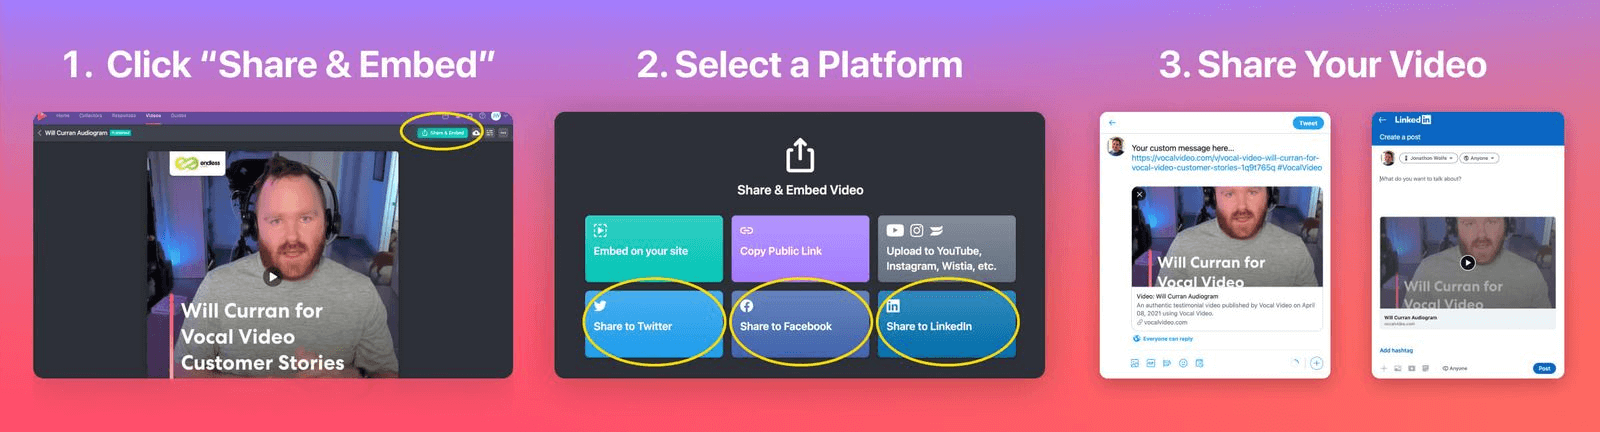 Step 1: Click "Share & Embed", Step 2: Select a Platform, Step 3: Share Your Video